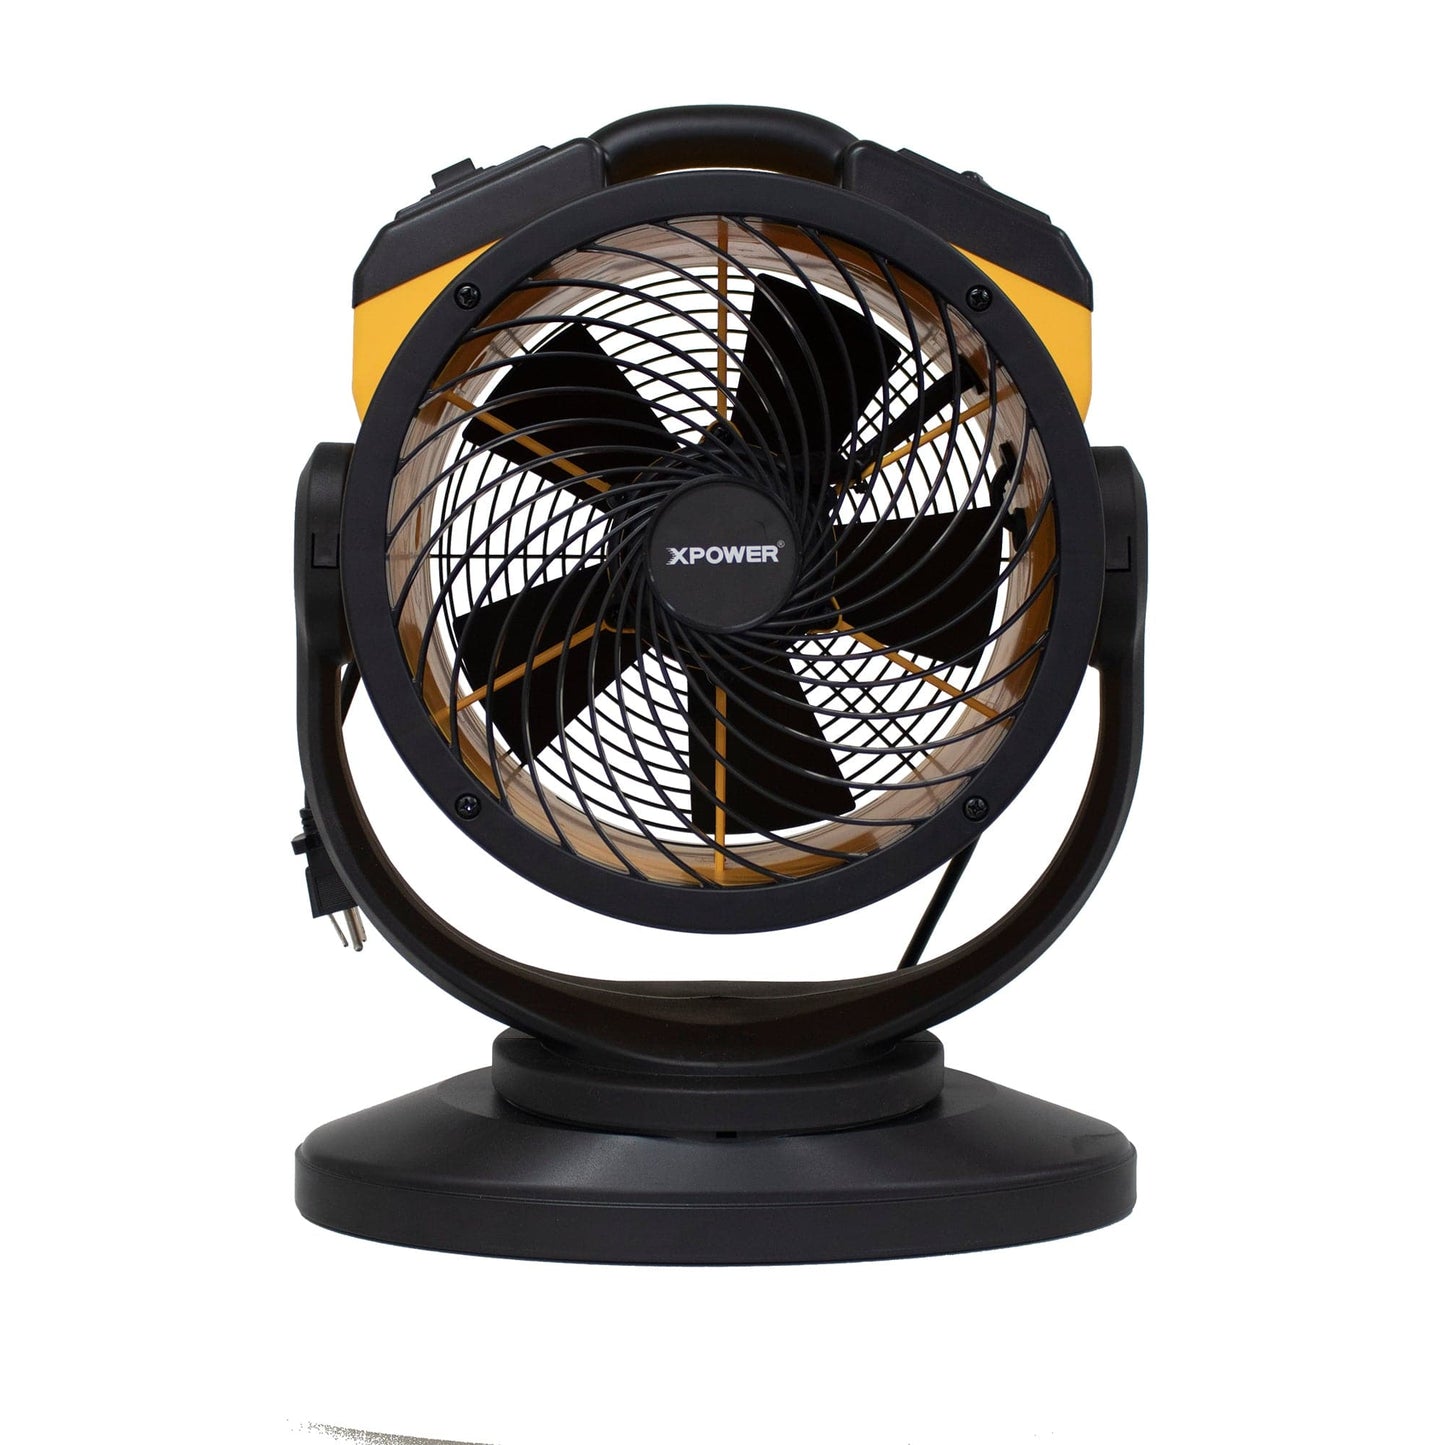 XPOWER FC-100S 1100 CFM 4 Speed Portable Multipurpose 11" Pro Air Circulator Utility Fan with Oscillating Feature